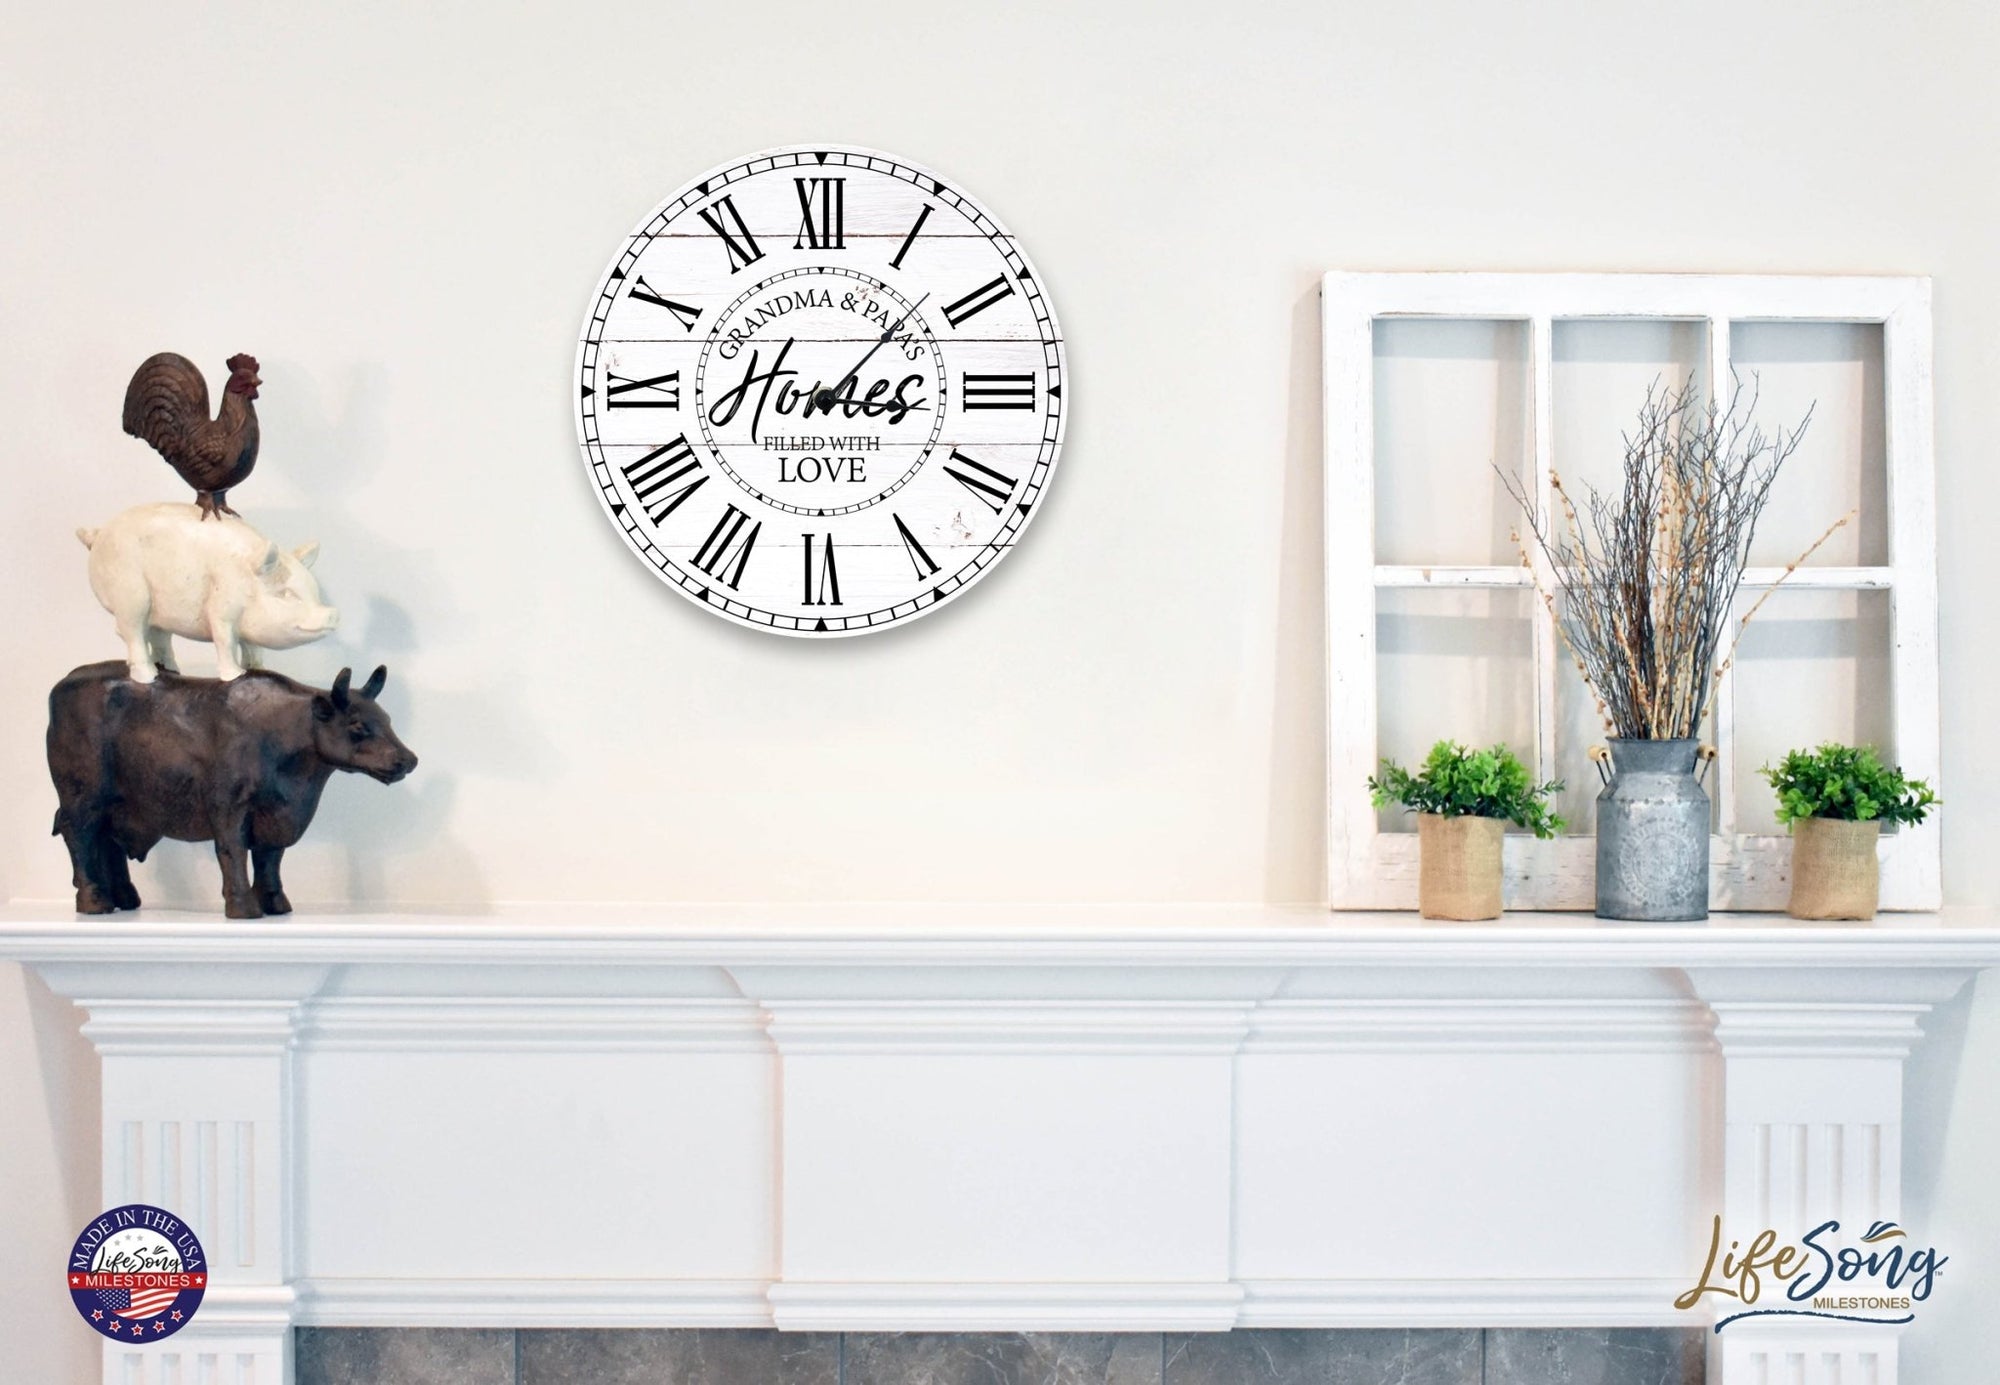 Everyday Home and Family Clock 12” x .0125” Grandma Grandpa Filled with Love - LifeSong Milestones